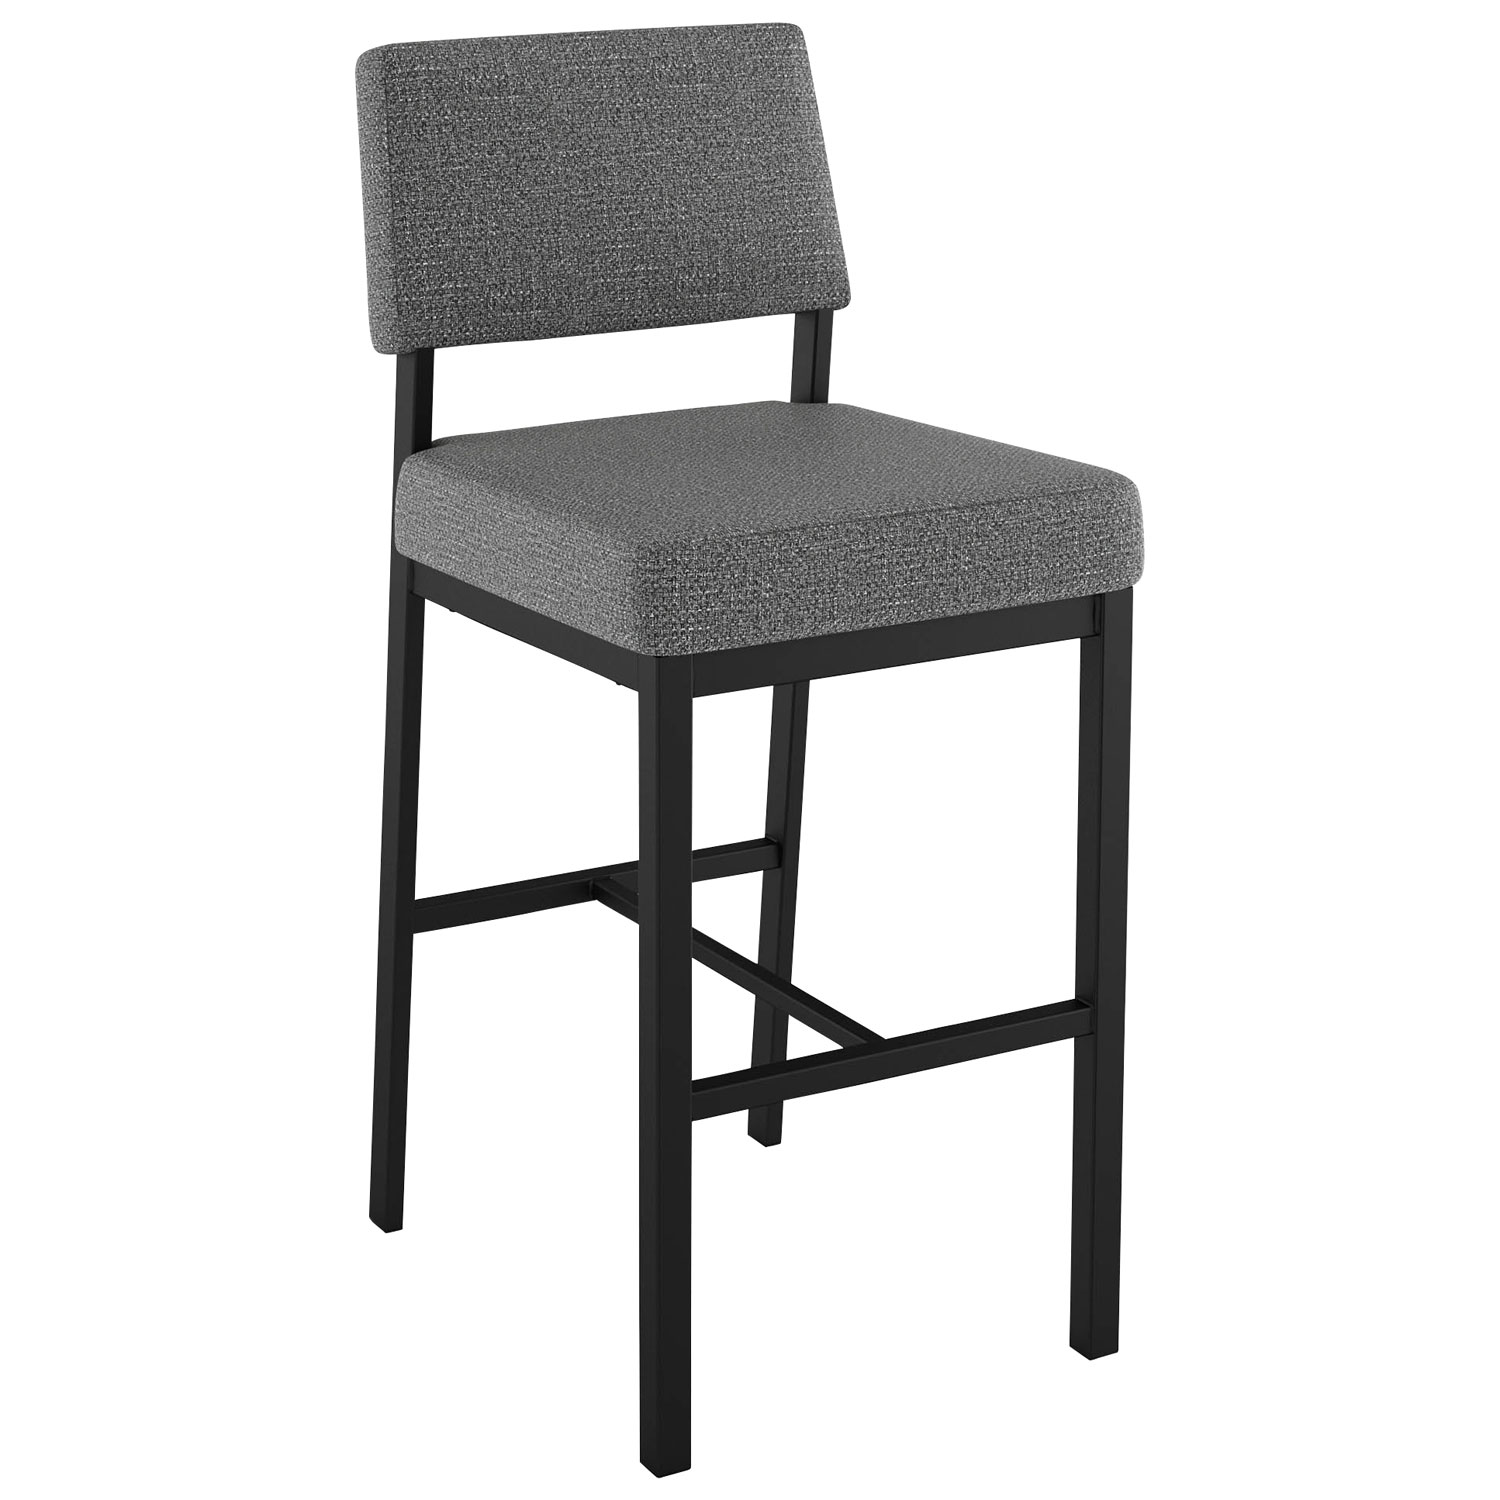 Avery Rustic Country Counter Height Barstool - Grey Woven/Black